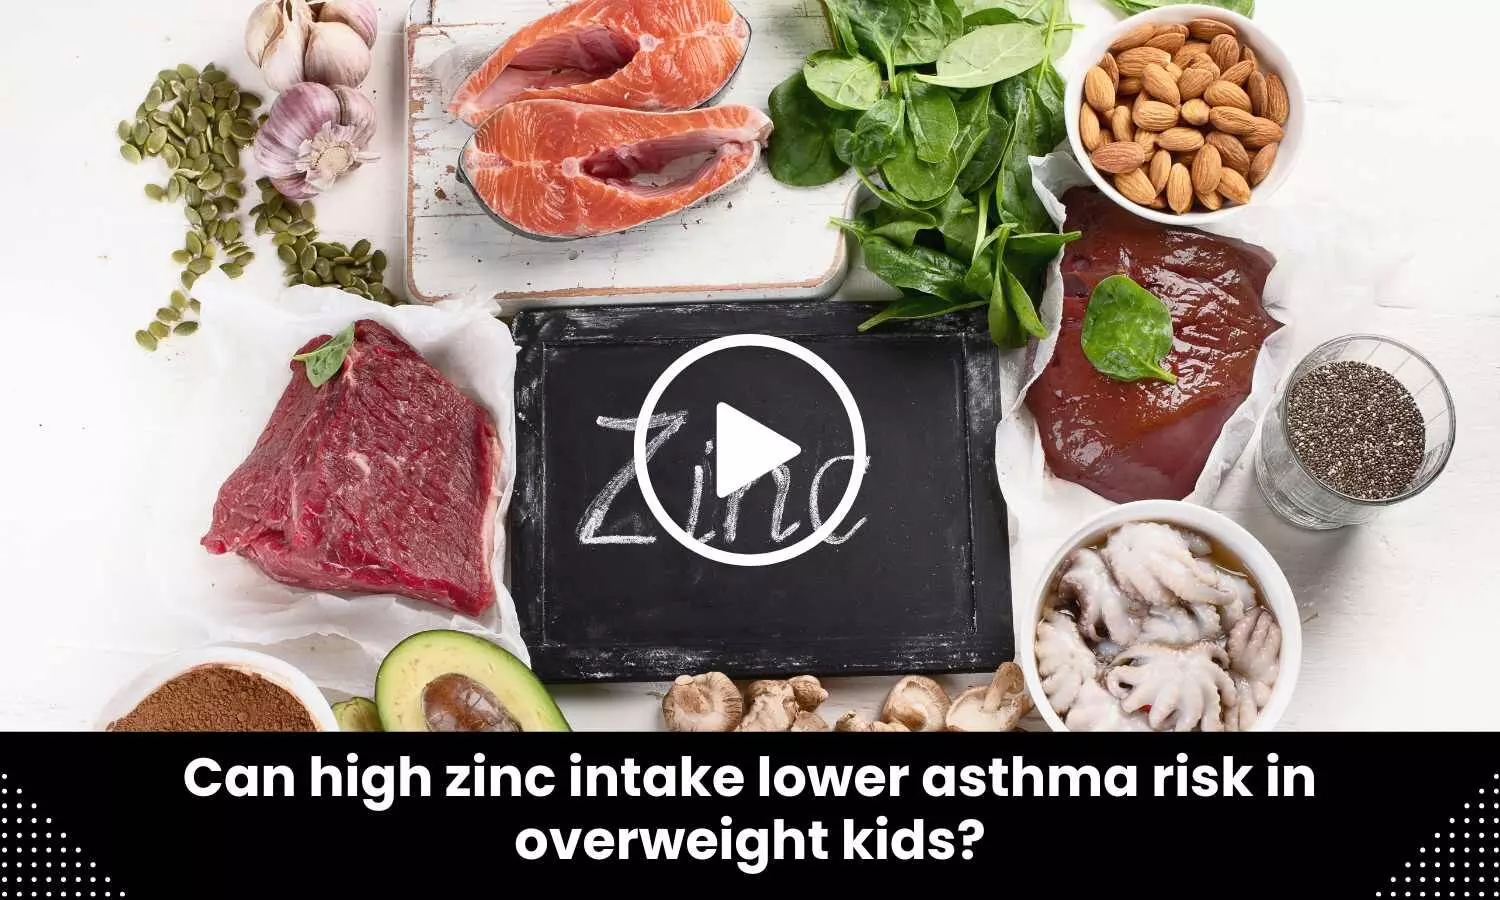 Can high zinc intake lower asthma risk in overweight kids?